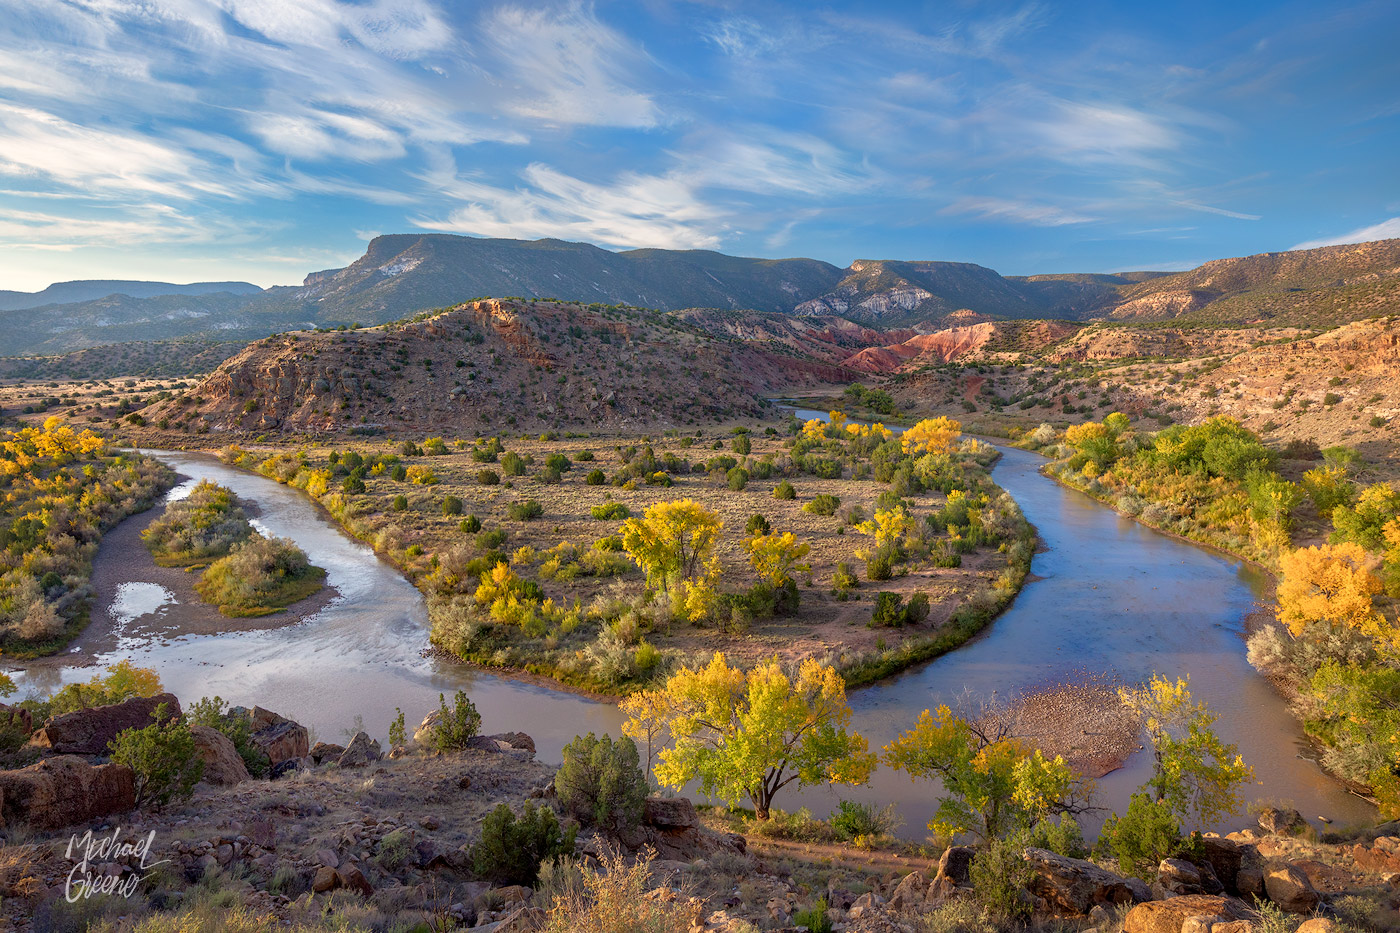 Morning light kisses the tablelands, plateaus and hillsides during autumn colors along the Rio Chama River in Northern NM.